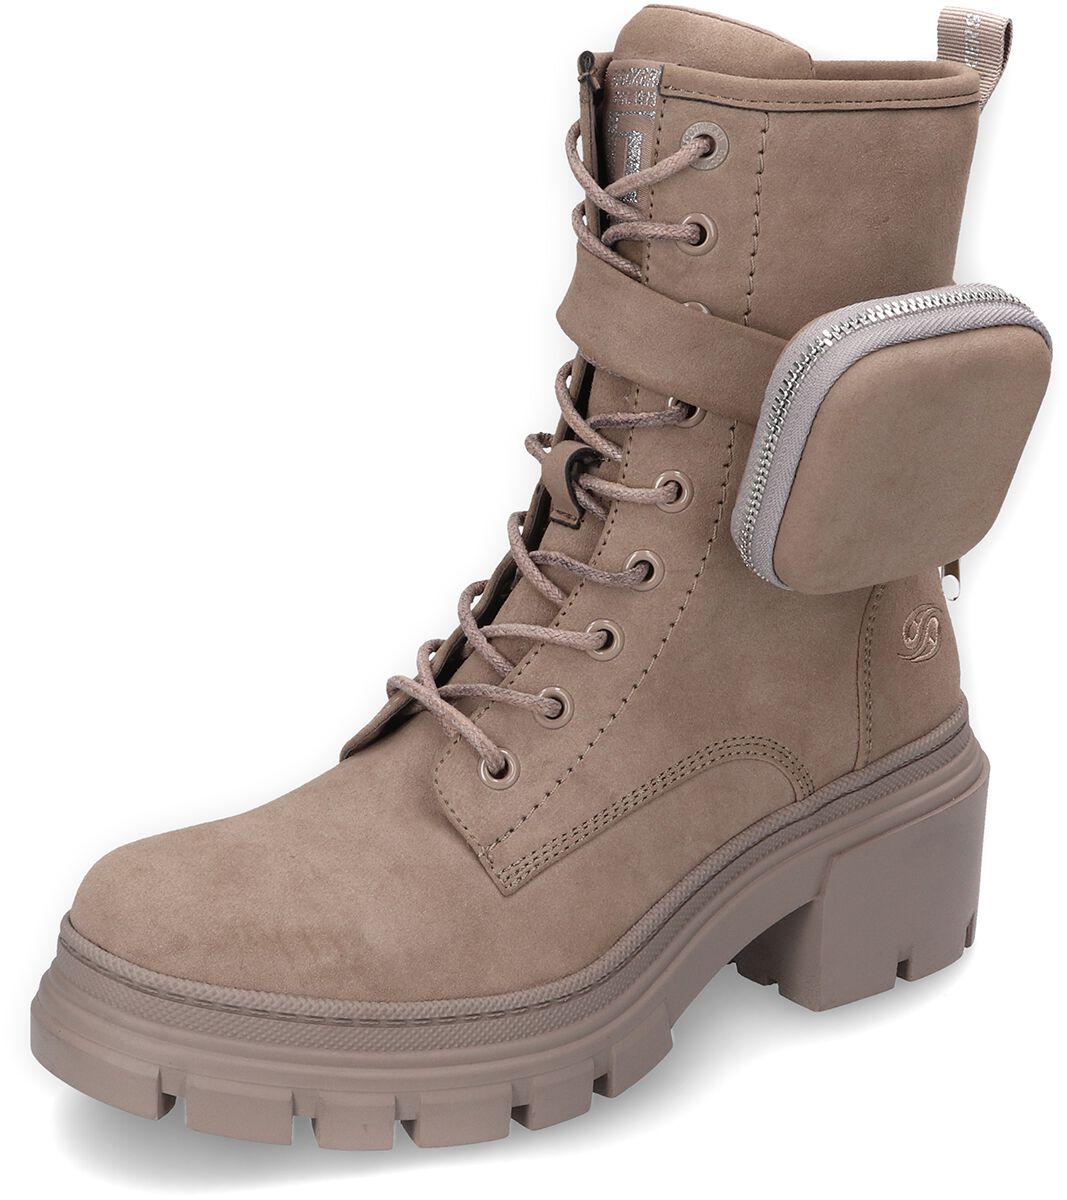 Image of Stivali di Dockers by Gerli - Lace-up boots with bag - EU38 a EU41 - Donna - taupe